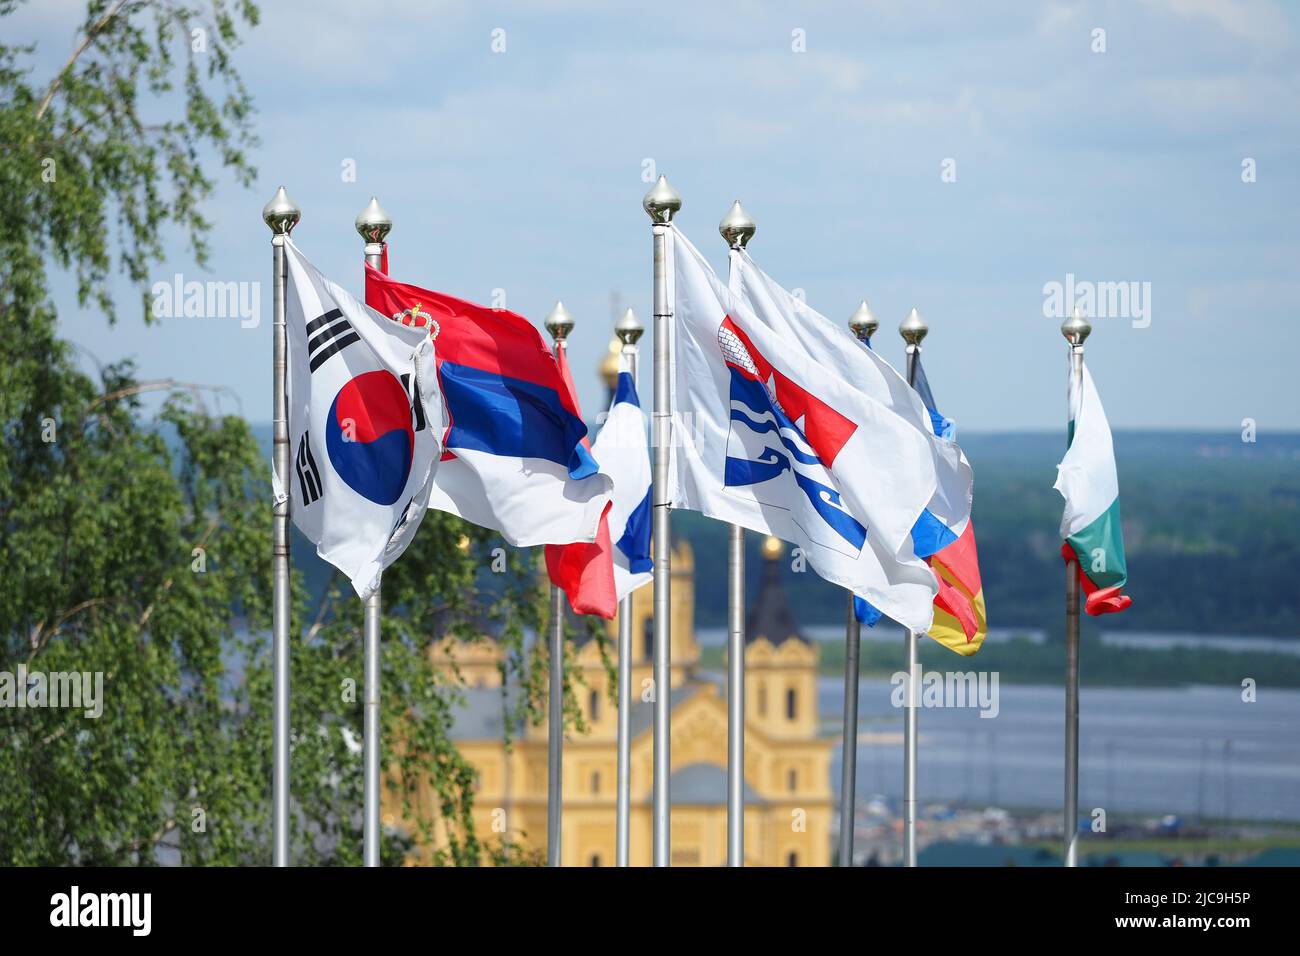 Various street flags of different countries develop on the flagpole.National symbols. Stock Photo